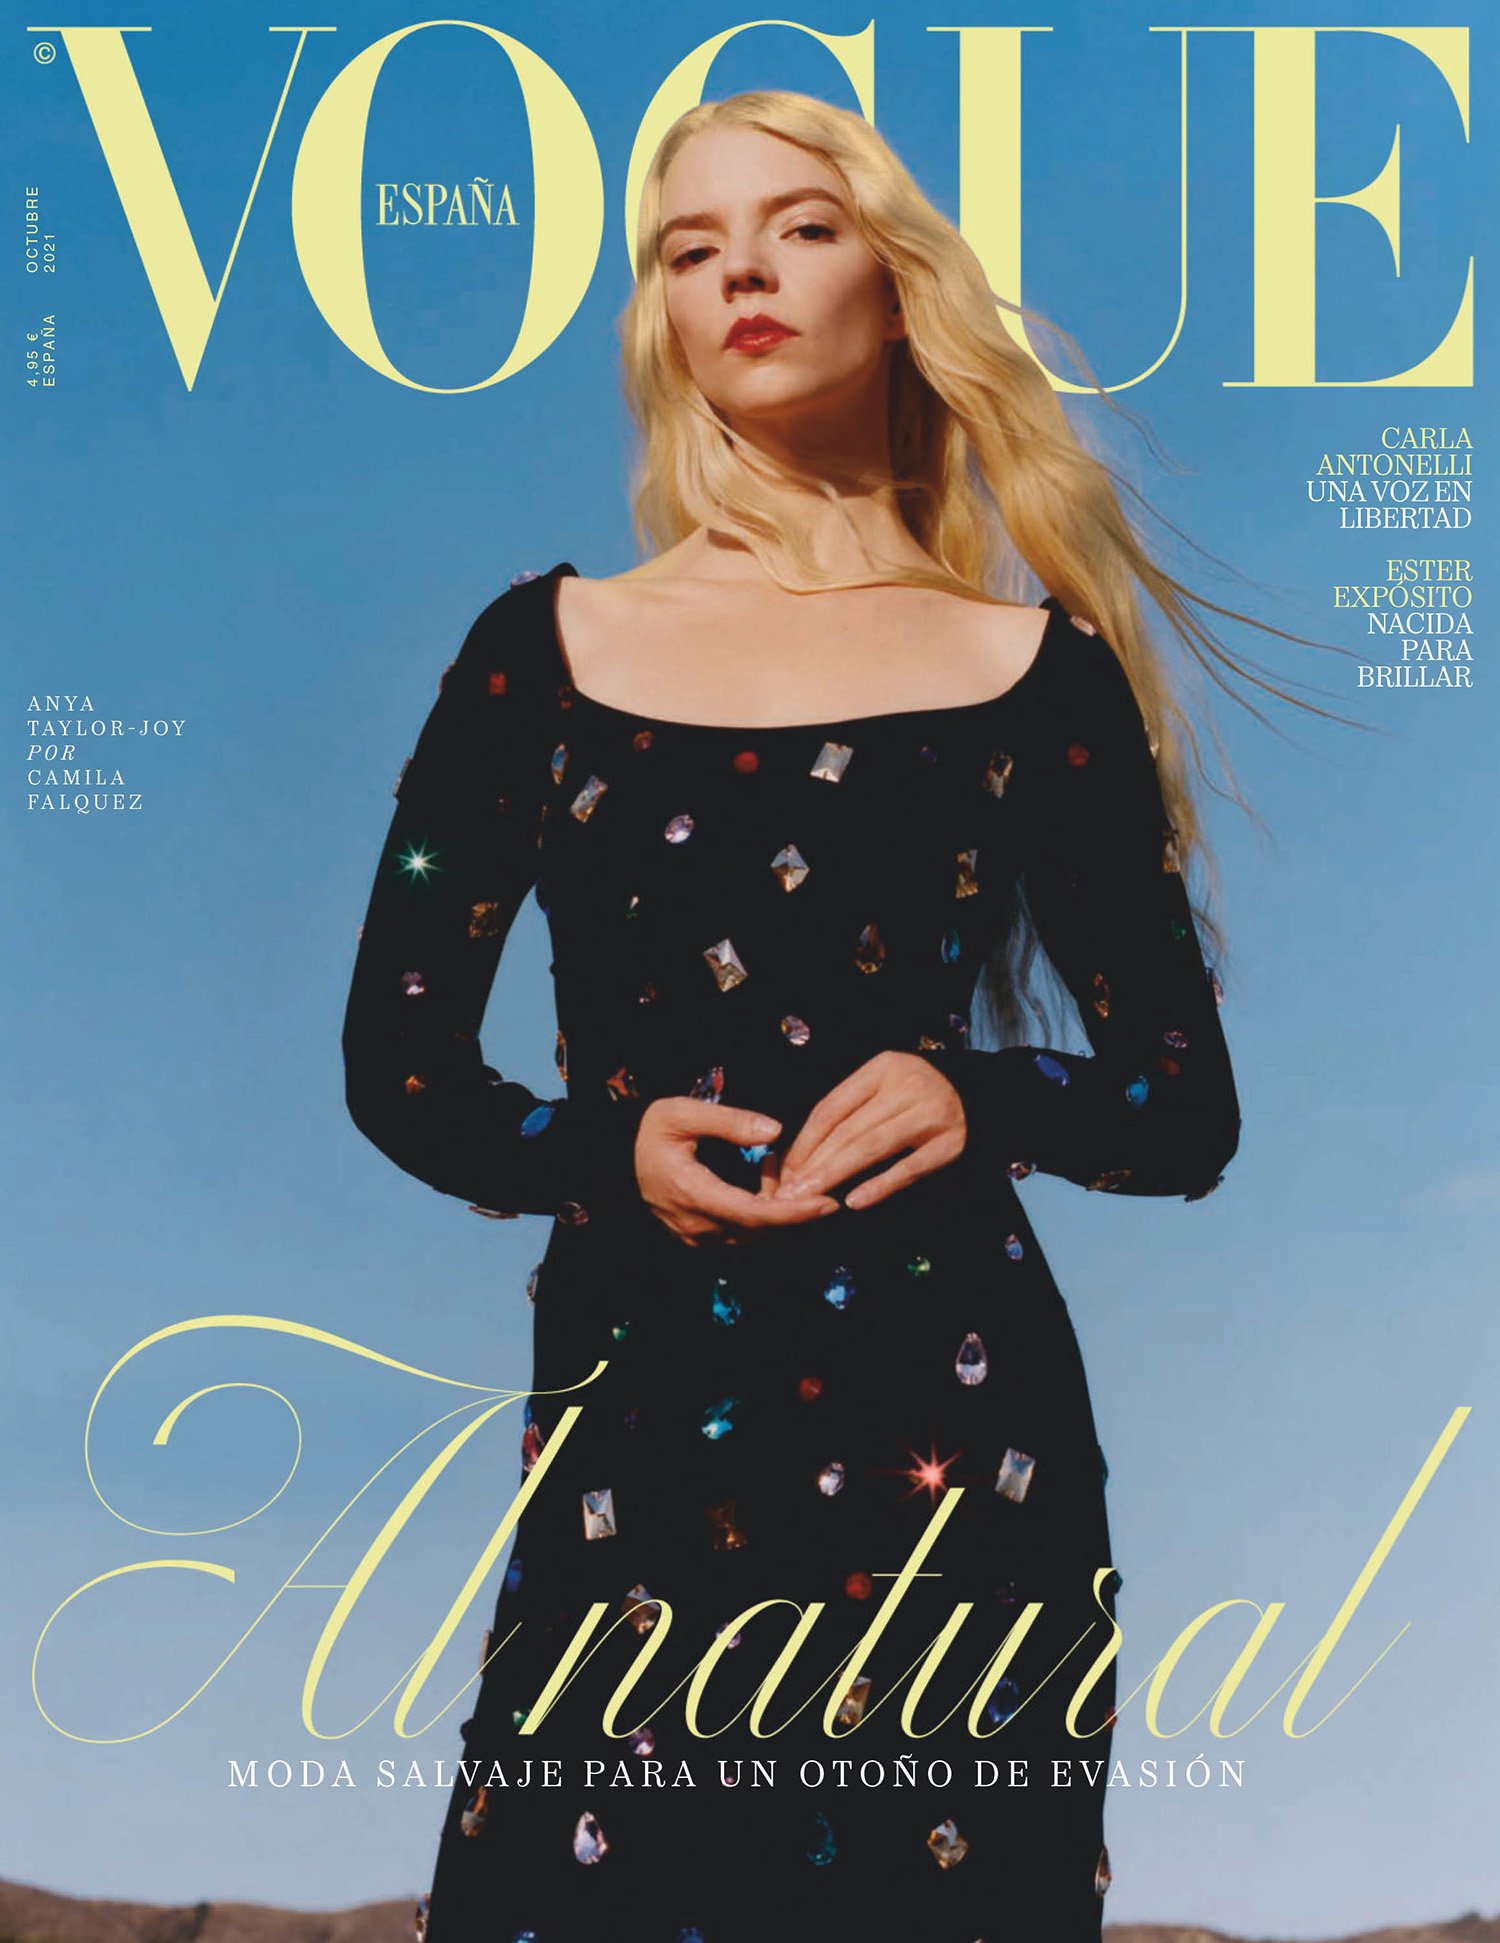 Anya Taylor-Joy covers Vogue Spain, Vogue Mexico  Latin America October  2021 by Camila Falquez - fashionotography